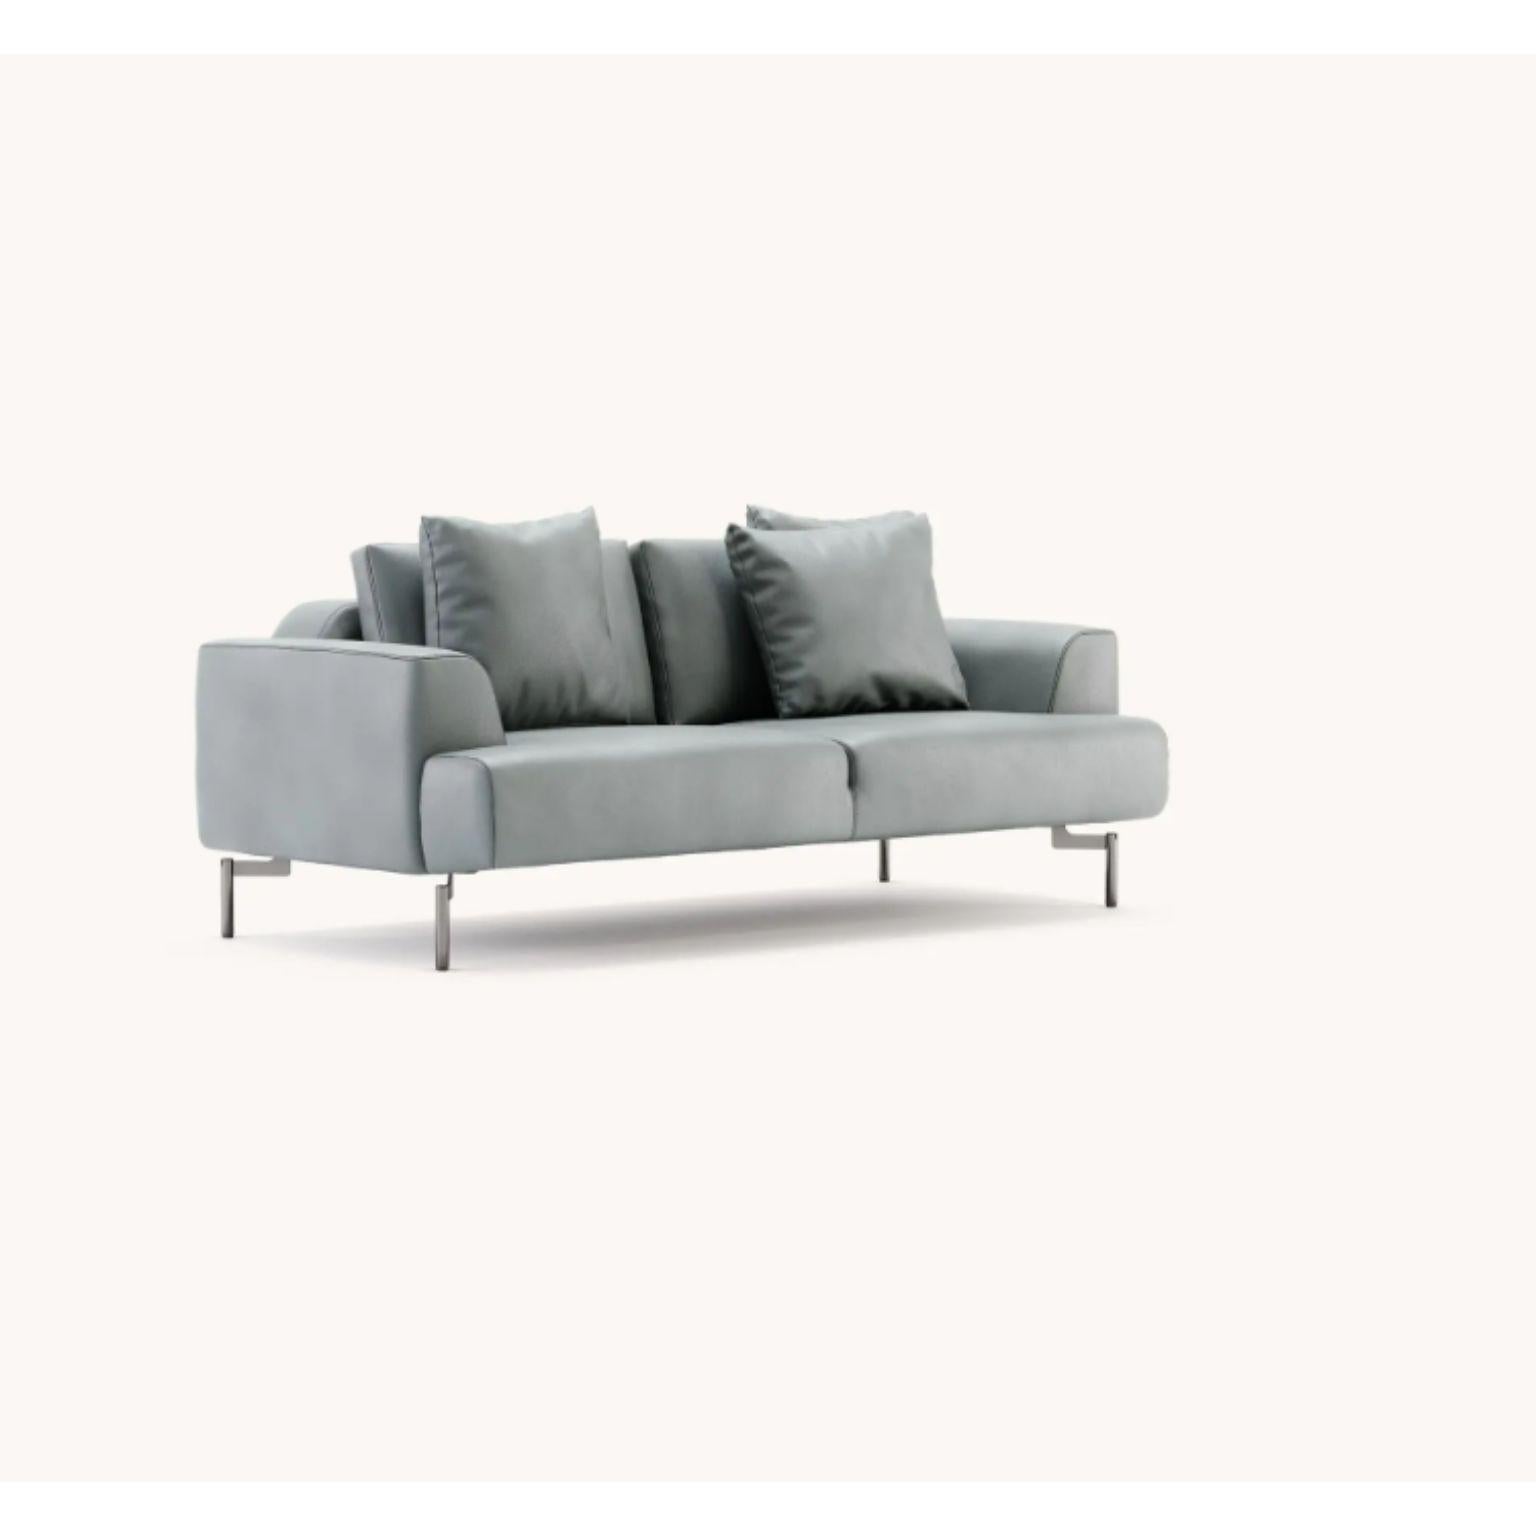 Taís 2 seats sofa by Domkapa
Materials: Natural leather (Desna Polvere), polished stainless steel. 
Dimensions: W 190 x D 95 x H 88 cm.
Also available in different materials. 
with 3 pillows included in the same fabric as the structure(50x50